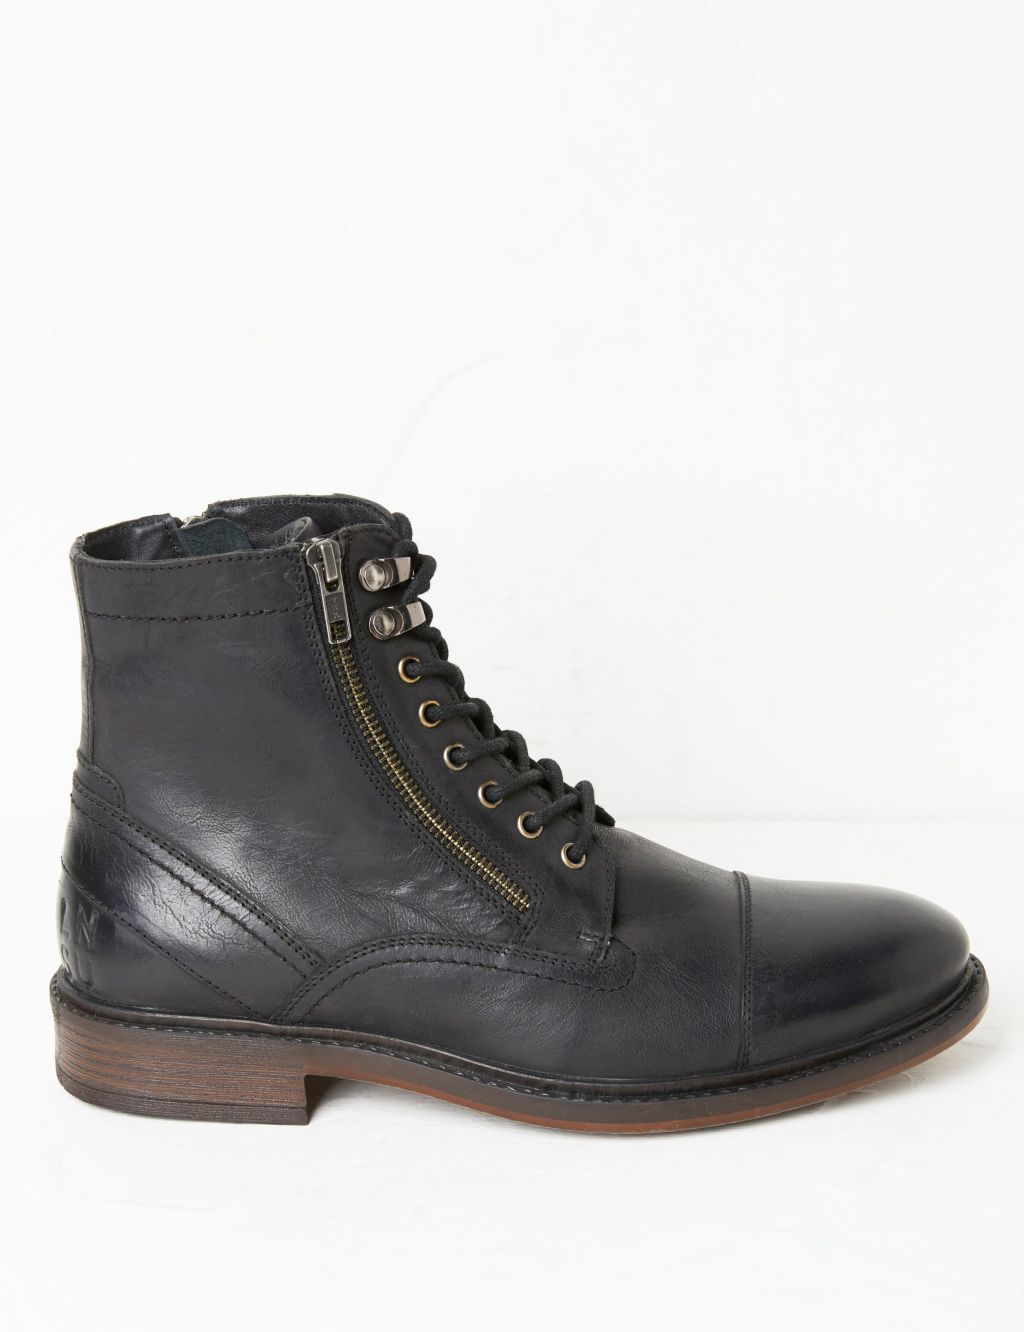 Leather Side Zip Casual Boots image 1